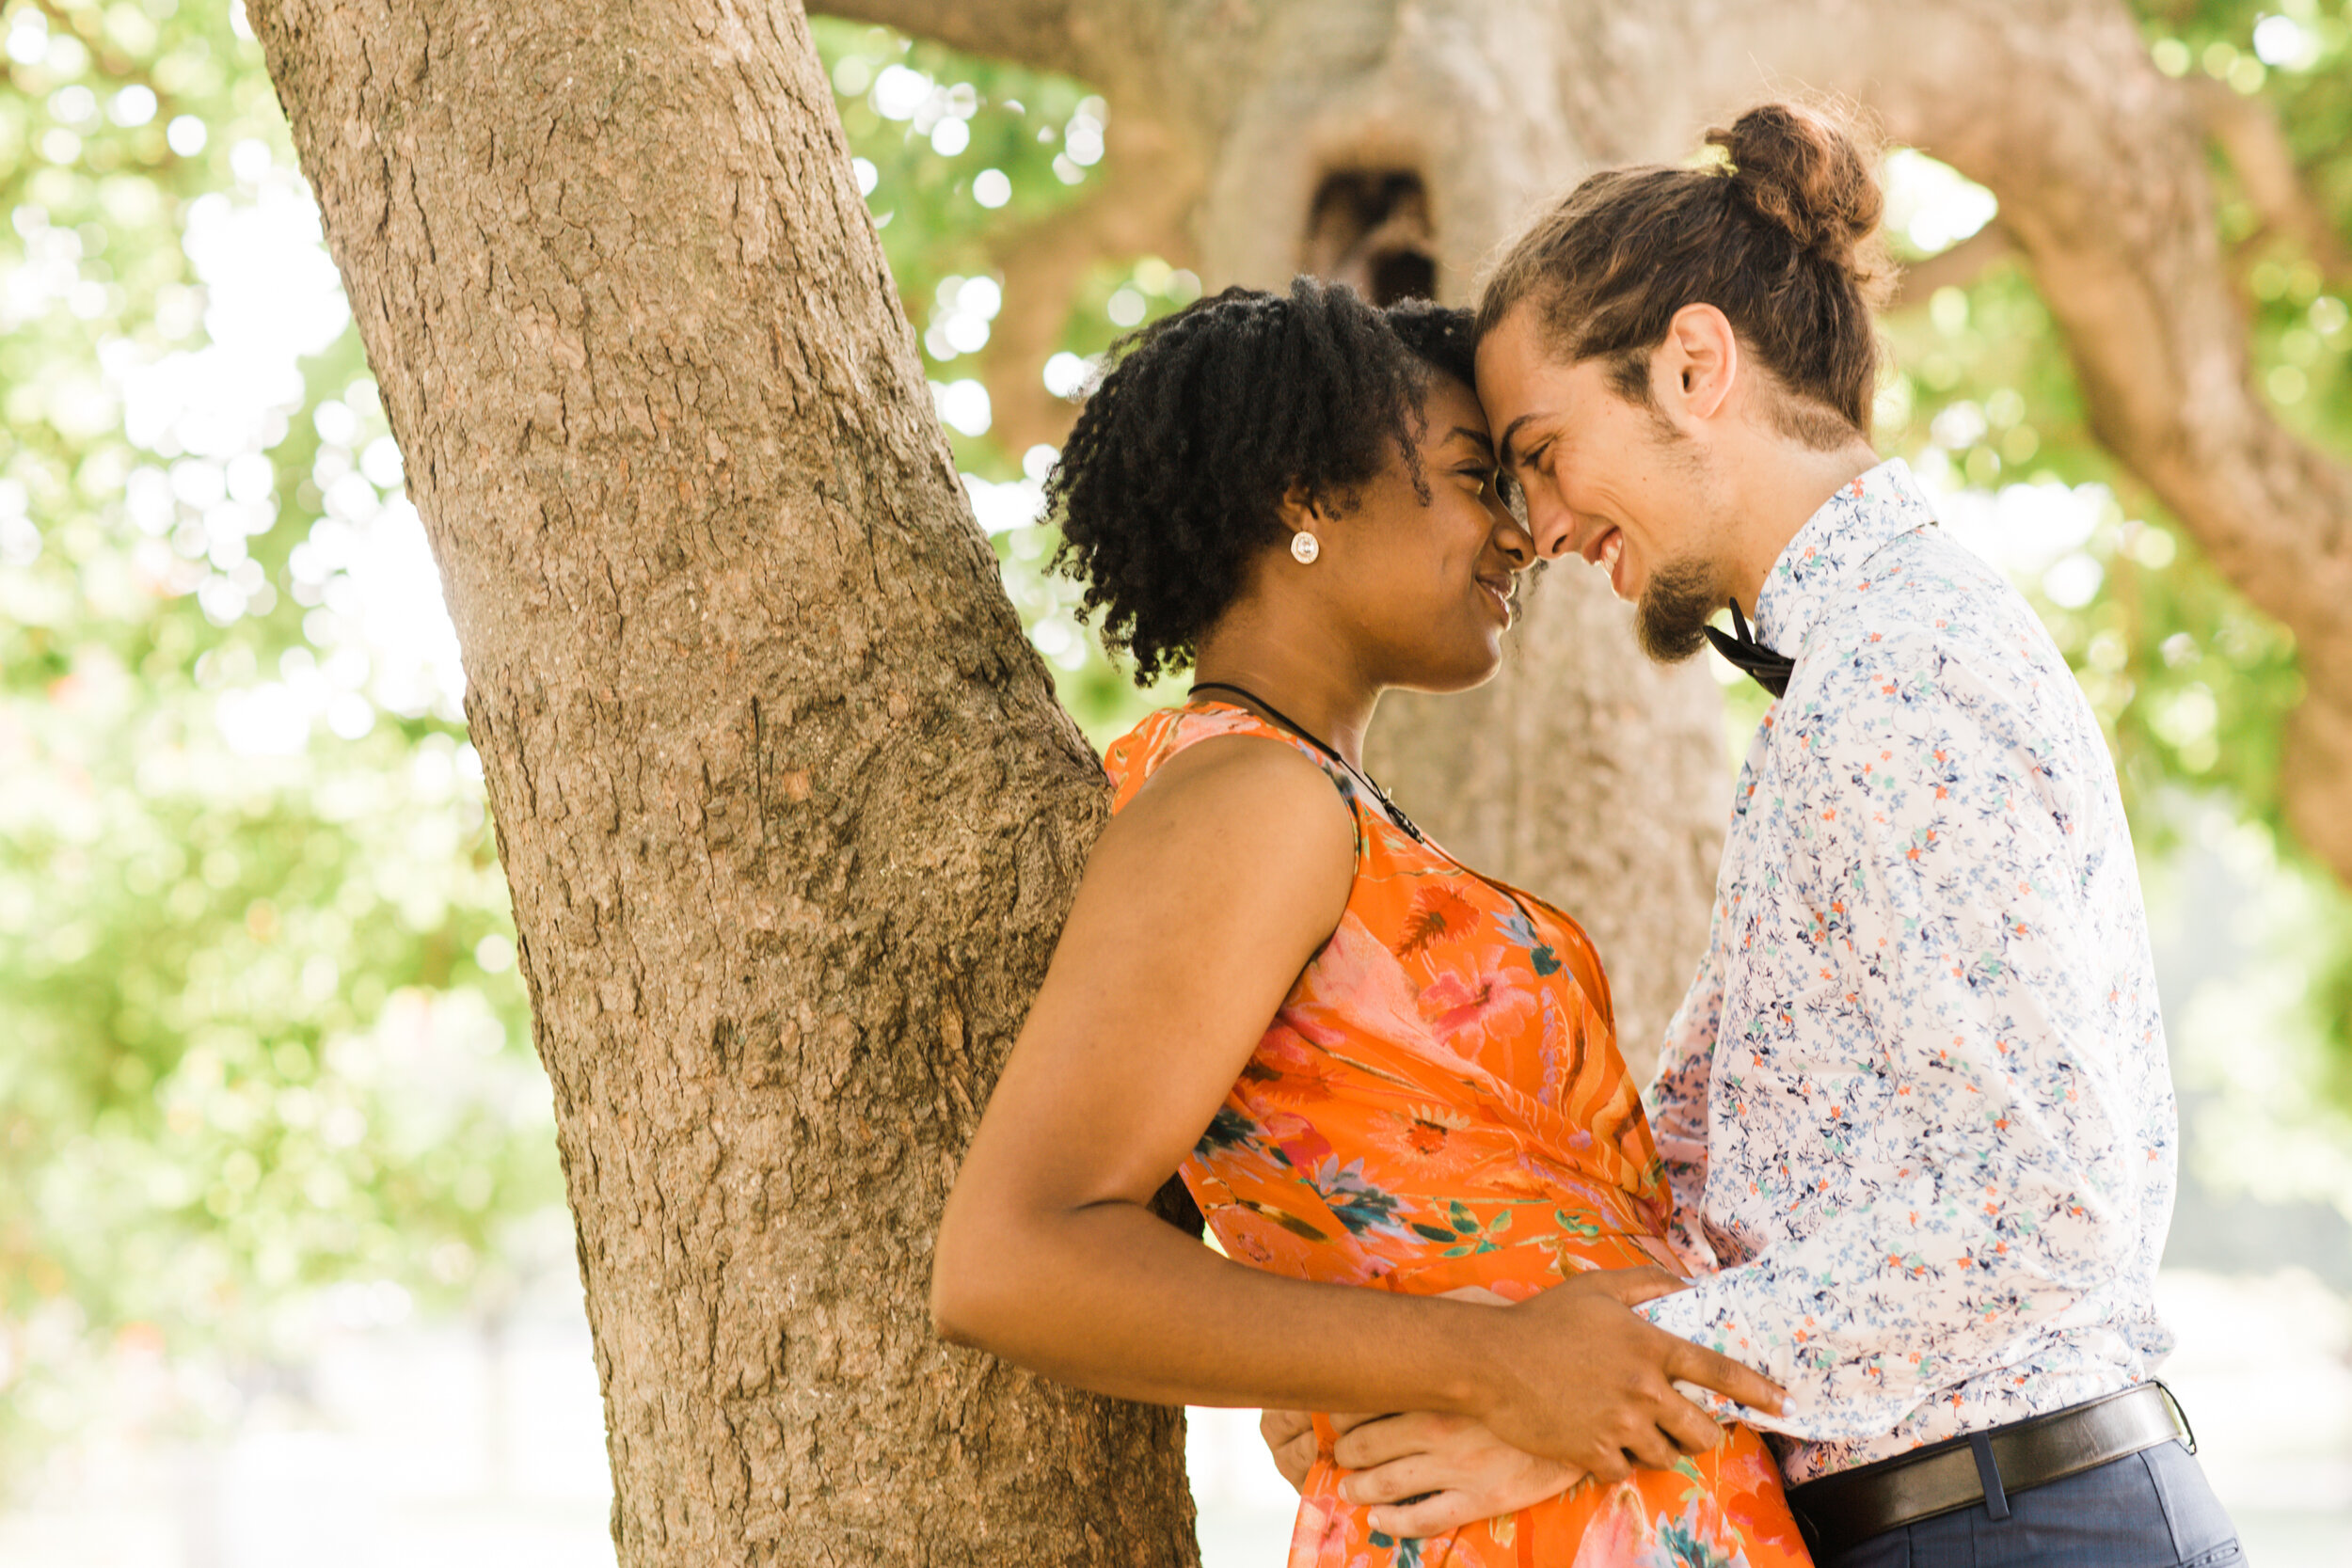 Golden Hour Engagement Session in Baltimore Maryland Patterson Park Pagoda DC Wedding Photographers Megapixels Media Photography and Videography Mixed Couple Multiracial Bride and Groom-28.jpg